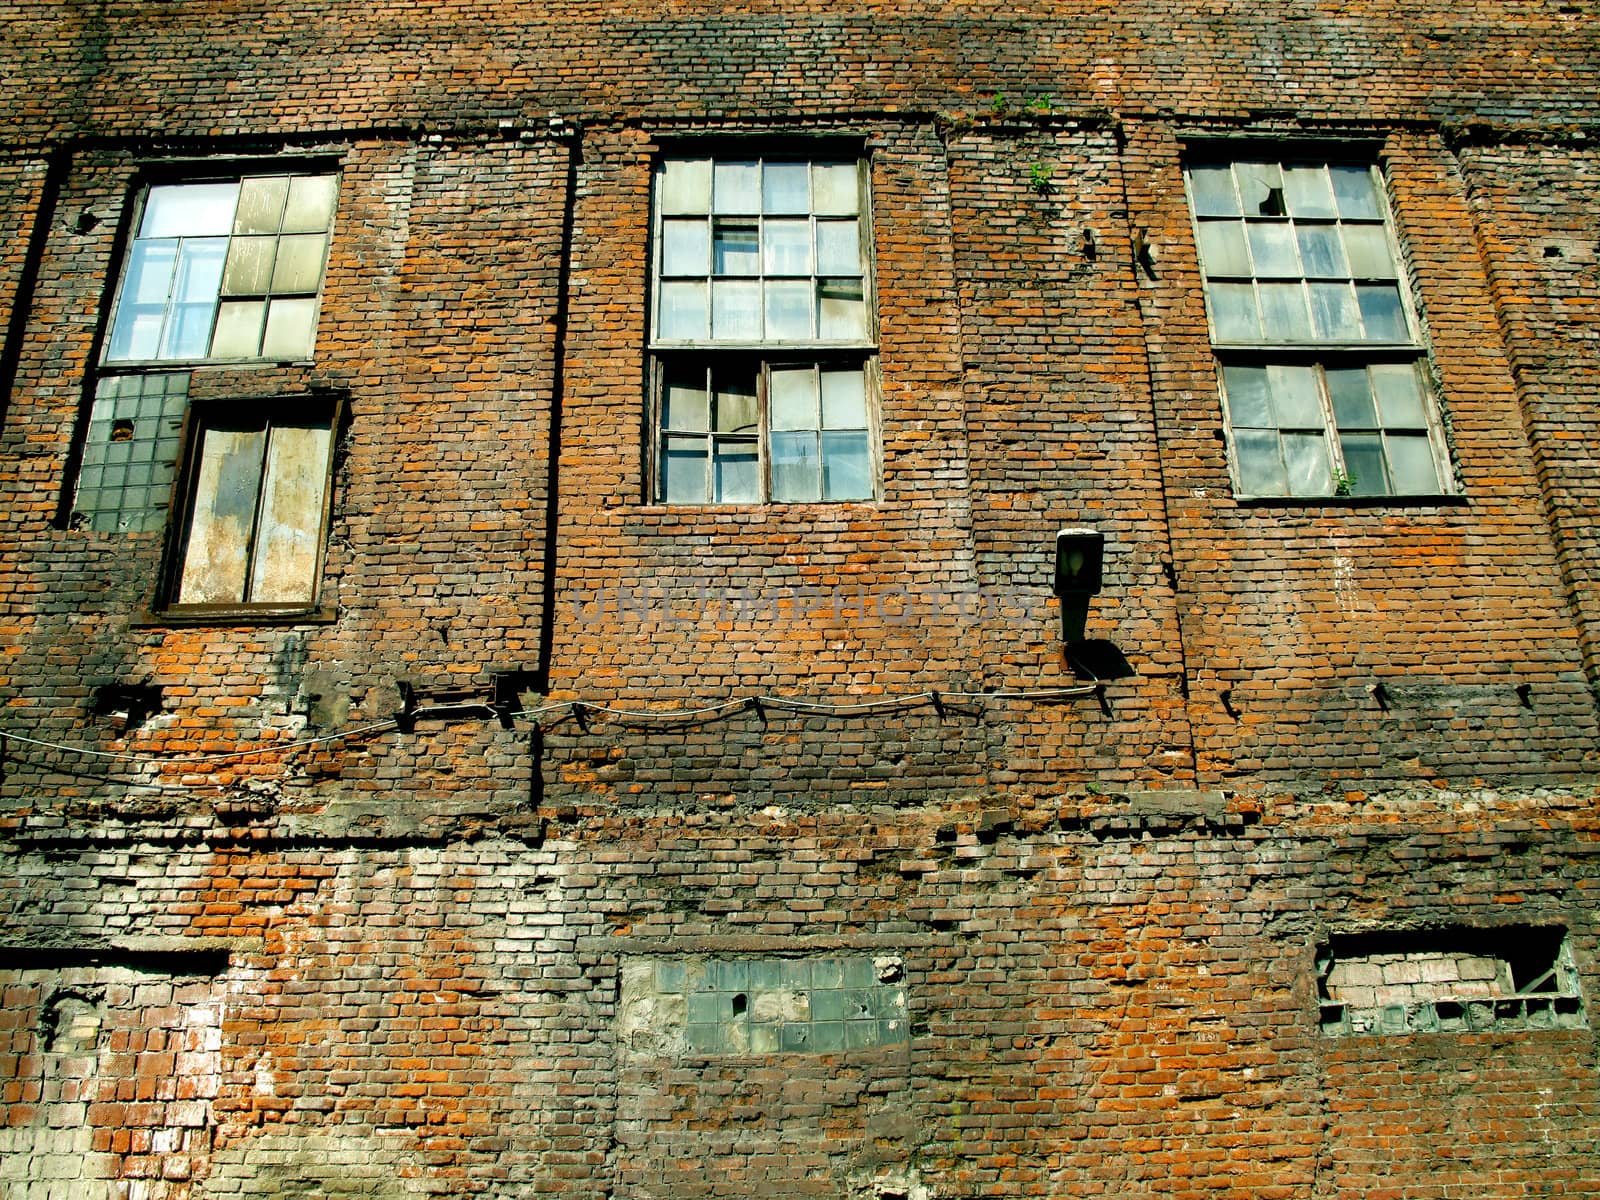 The brick wall of the old factory in Moscow, Russia